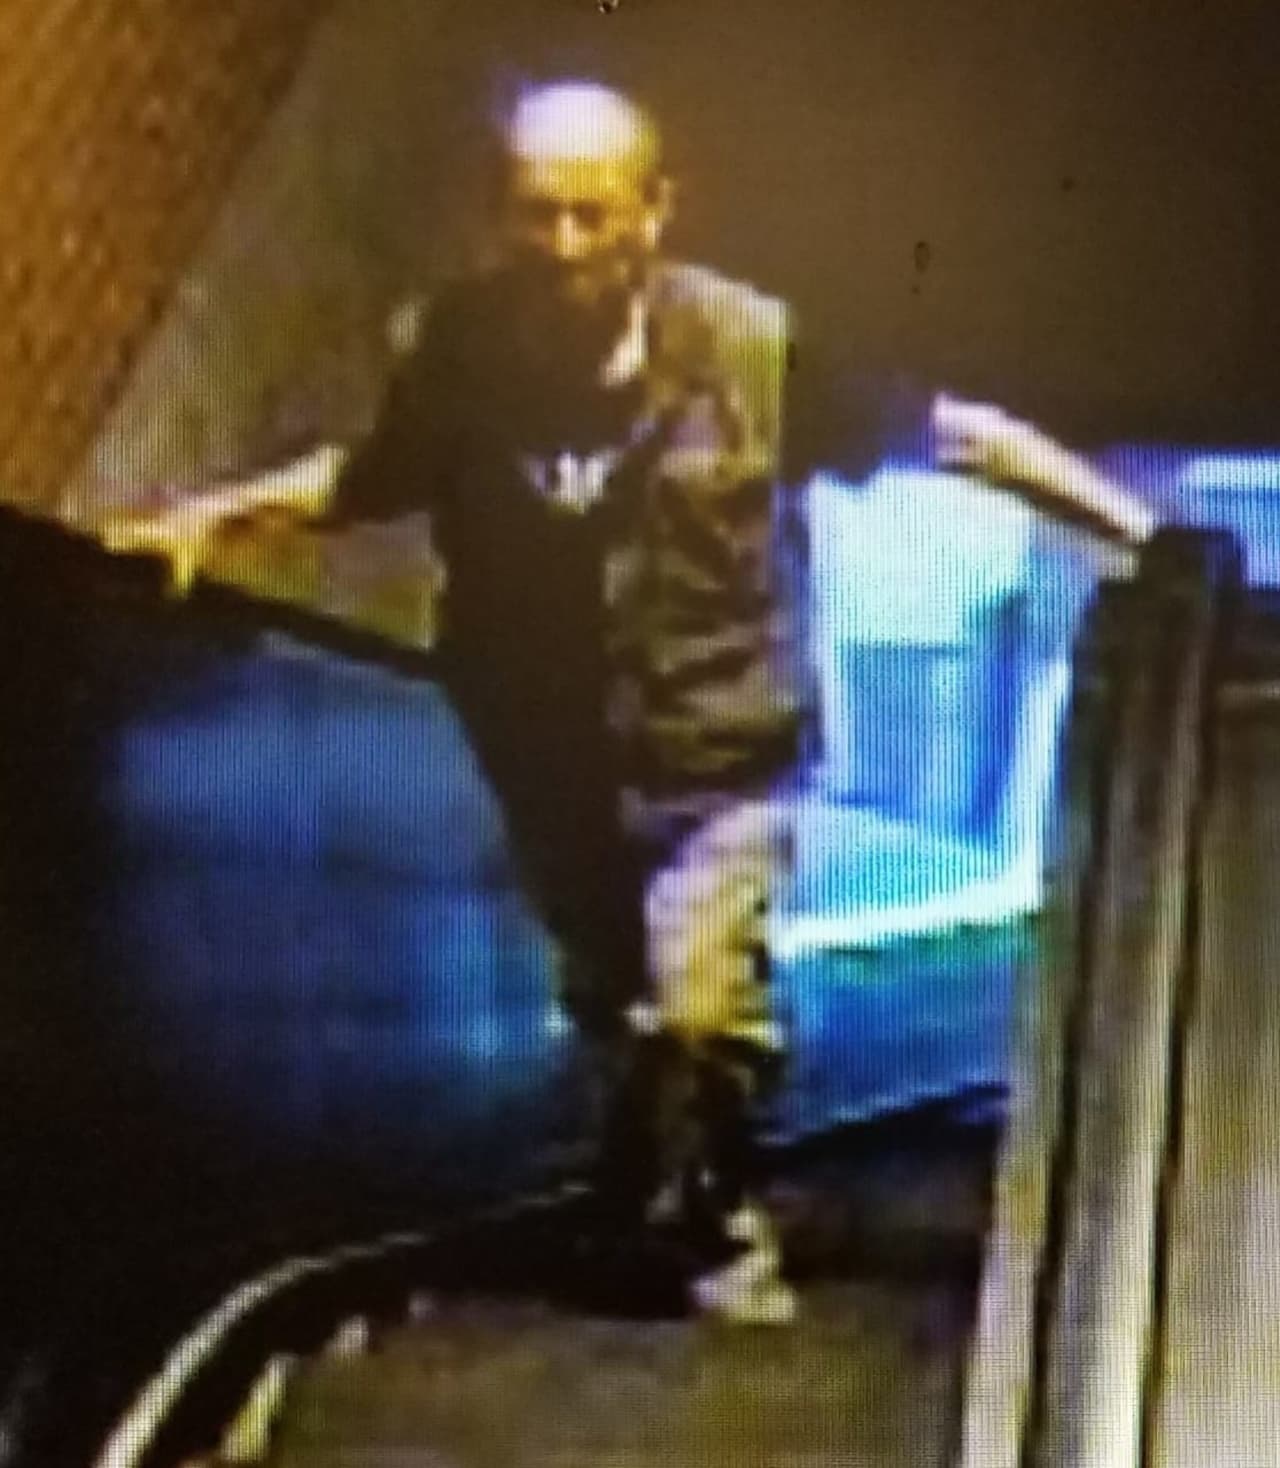 MTA Police are asking for the public's help identifying a man who was hit and killed by a train on Long Island.